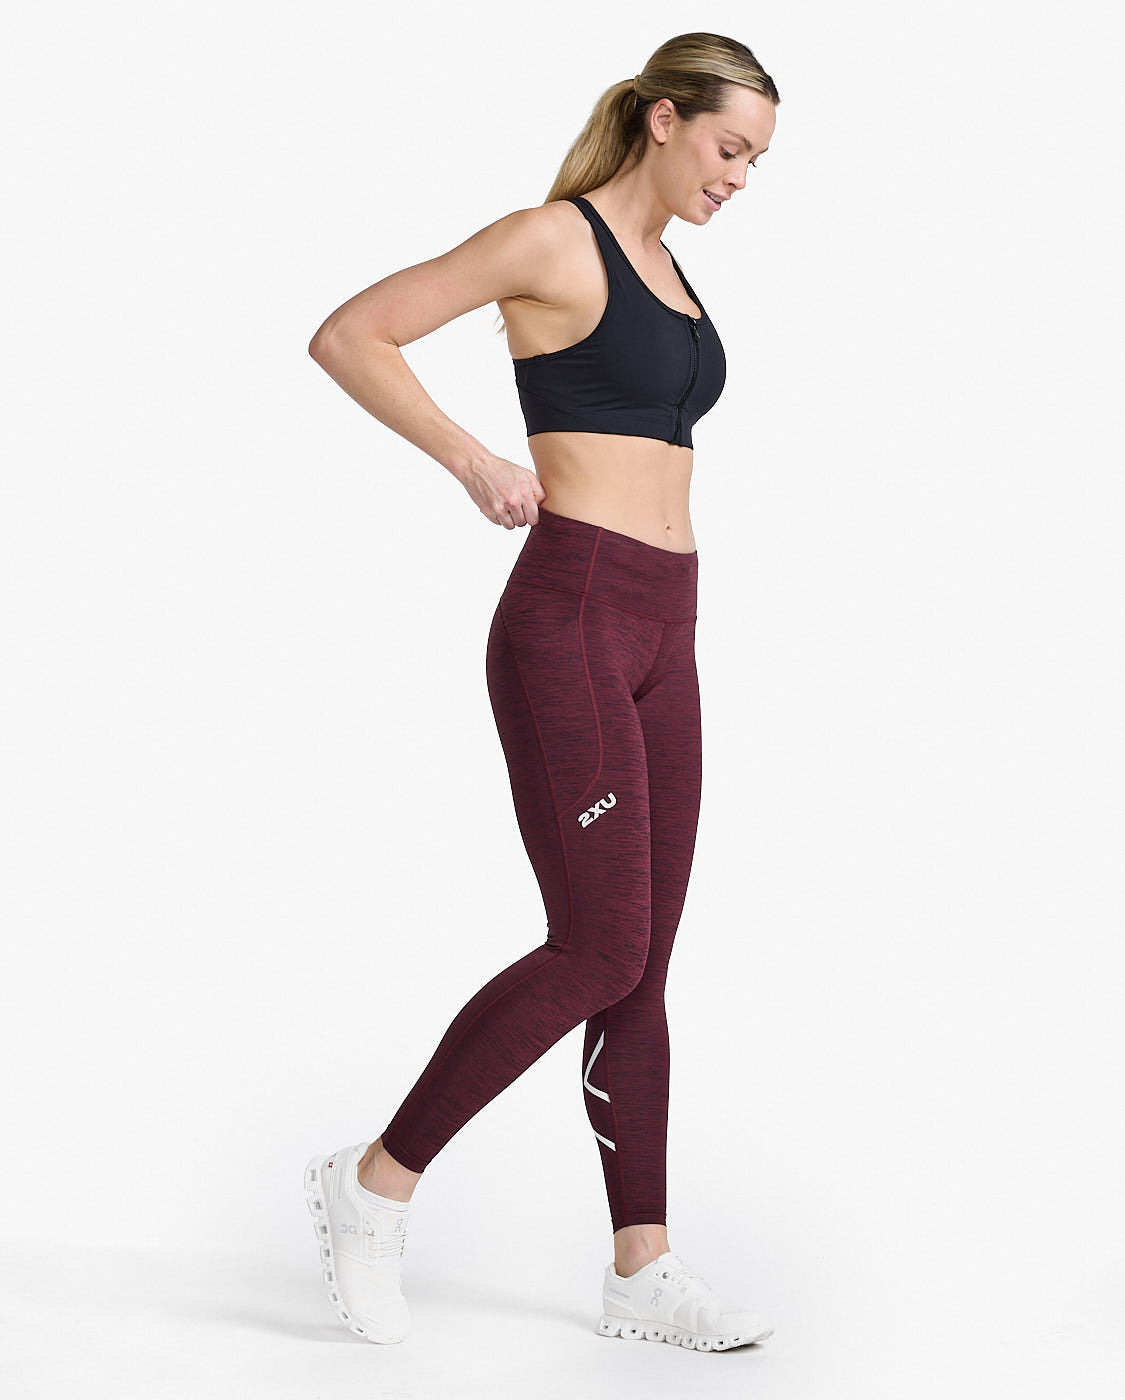 Women's 2XU Mid-Rise Compression Tights Baselayer